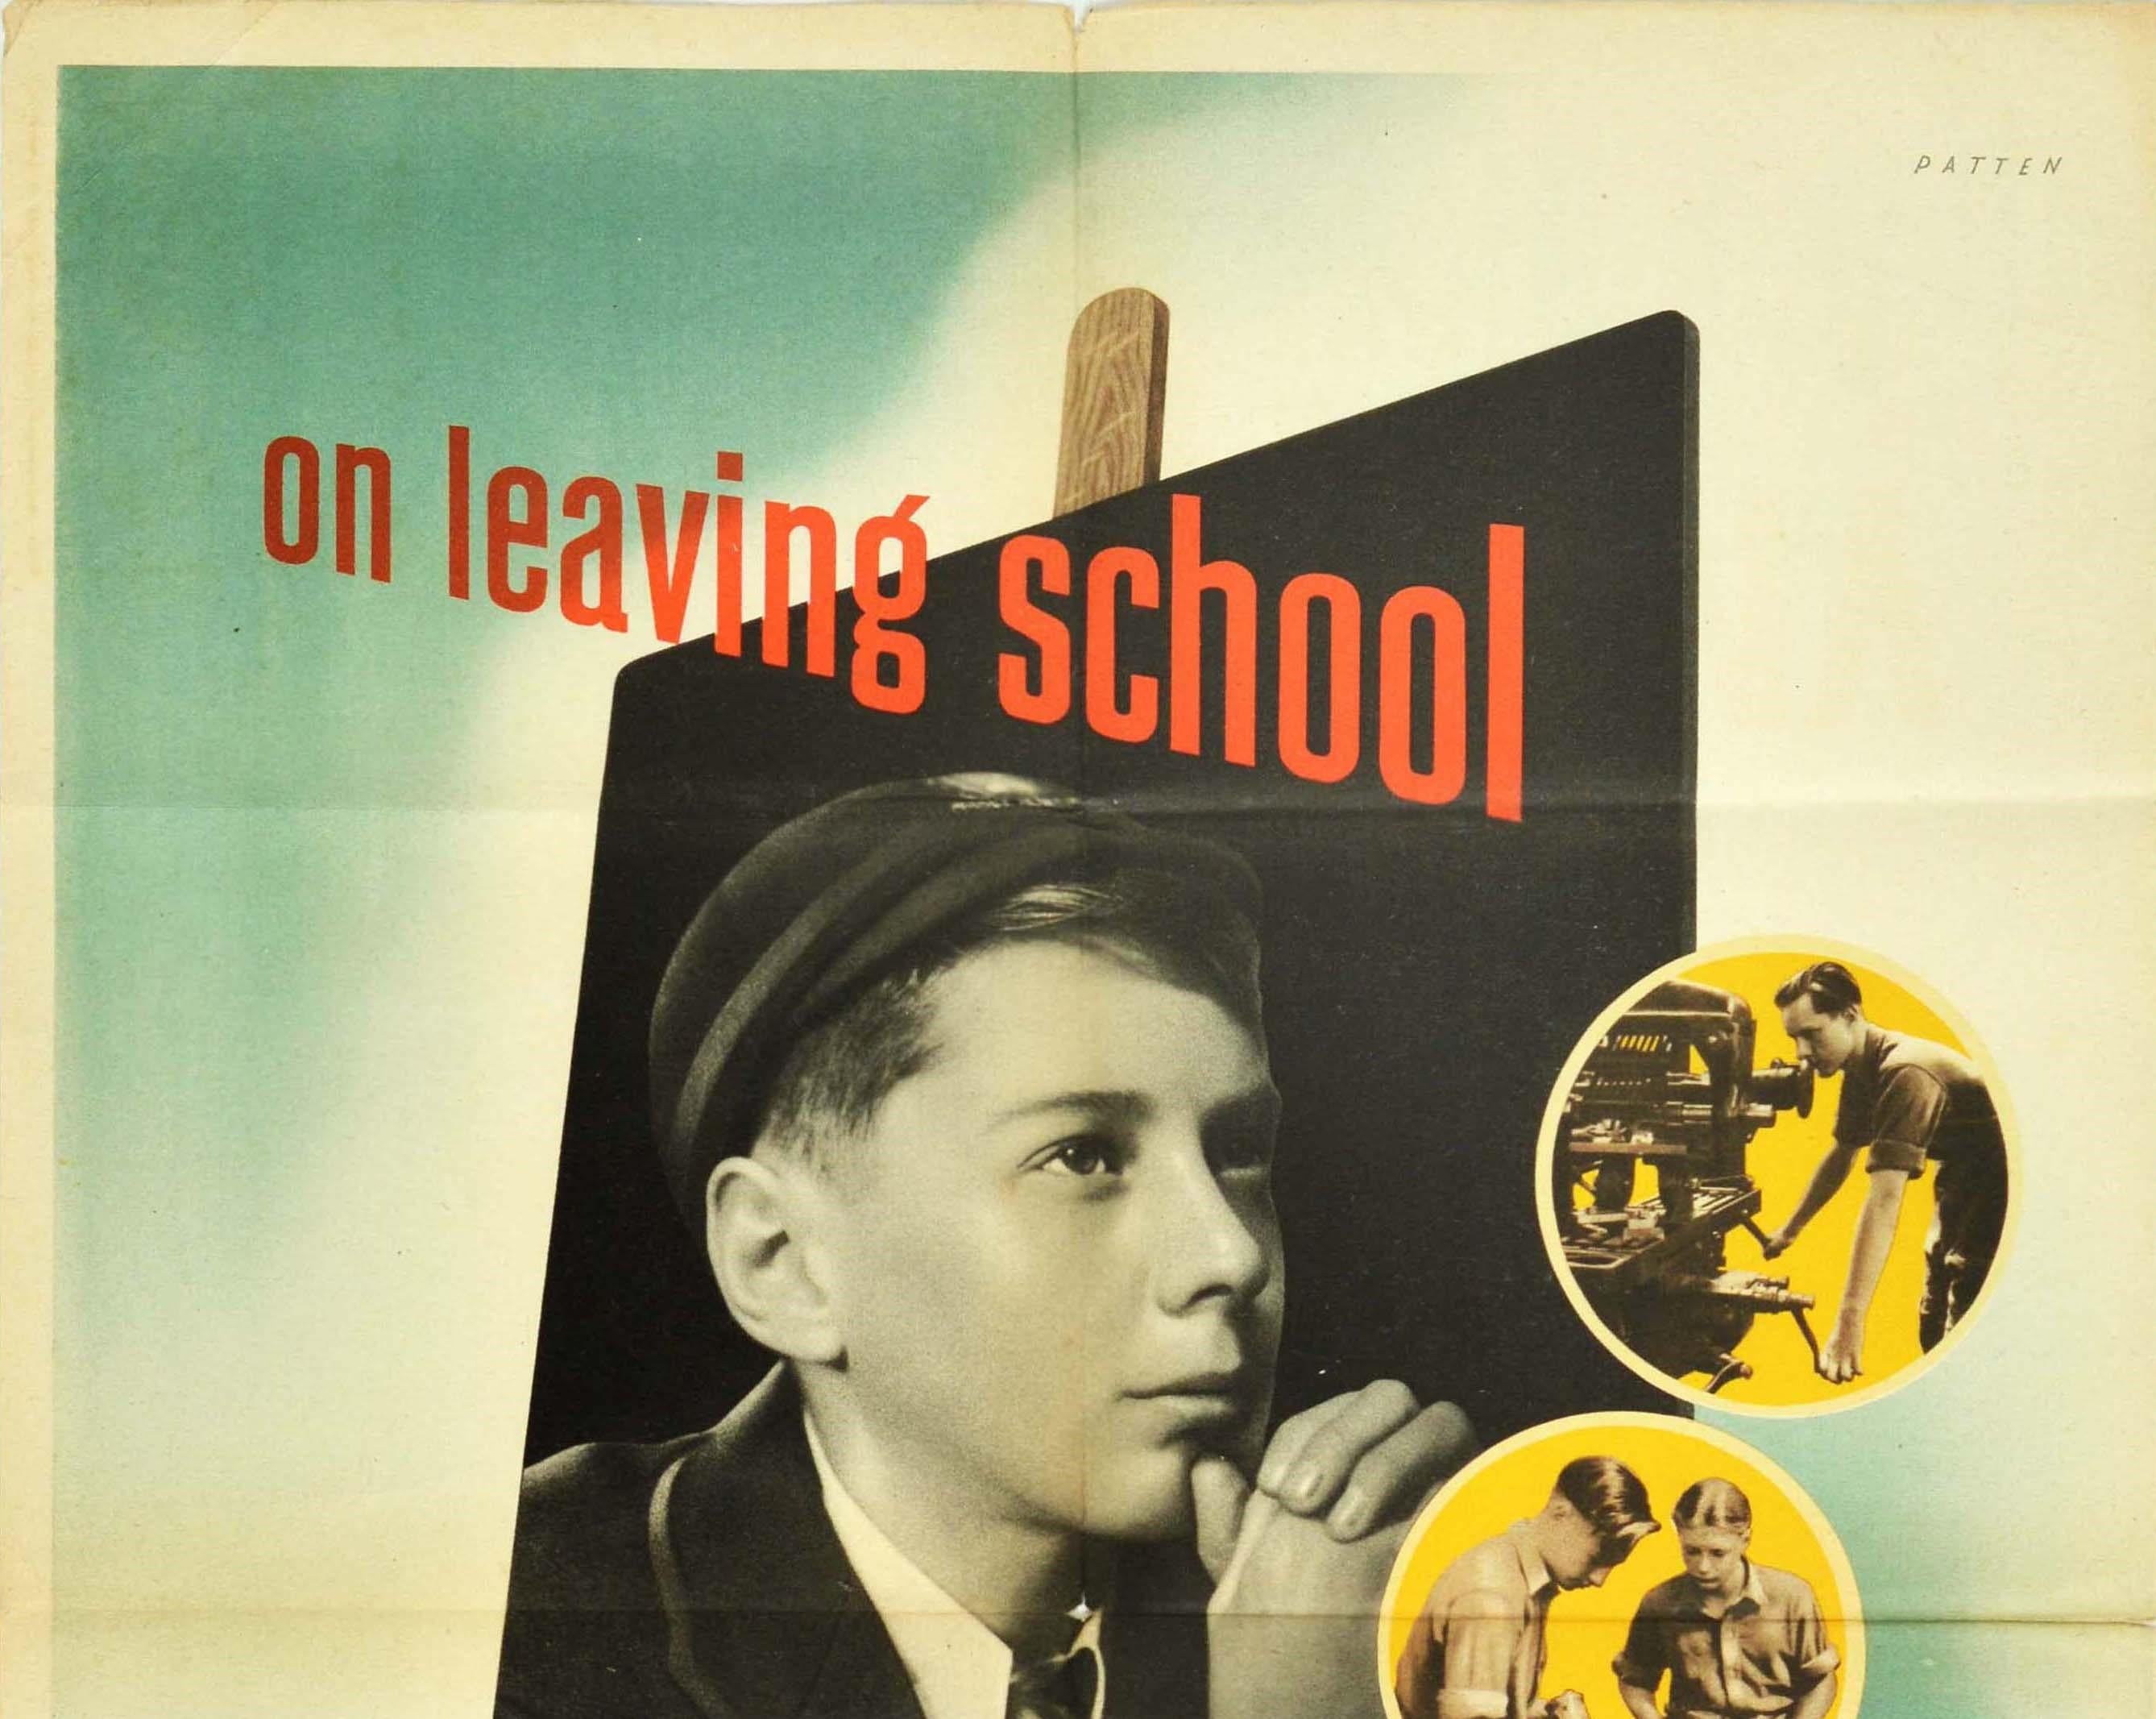 Original vintage army recruitment poster - On leaving school become an army apprentice tradesman - featuring a great design showing a black and white photo of a young schoolboy in smart school uniform thinking about his future career on a blackboard